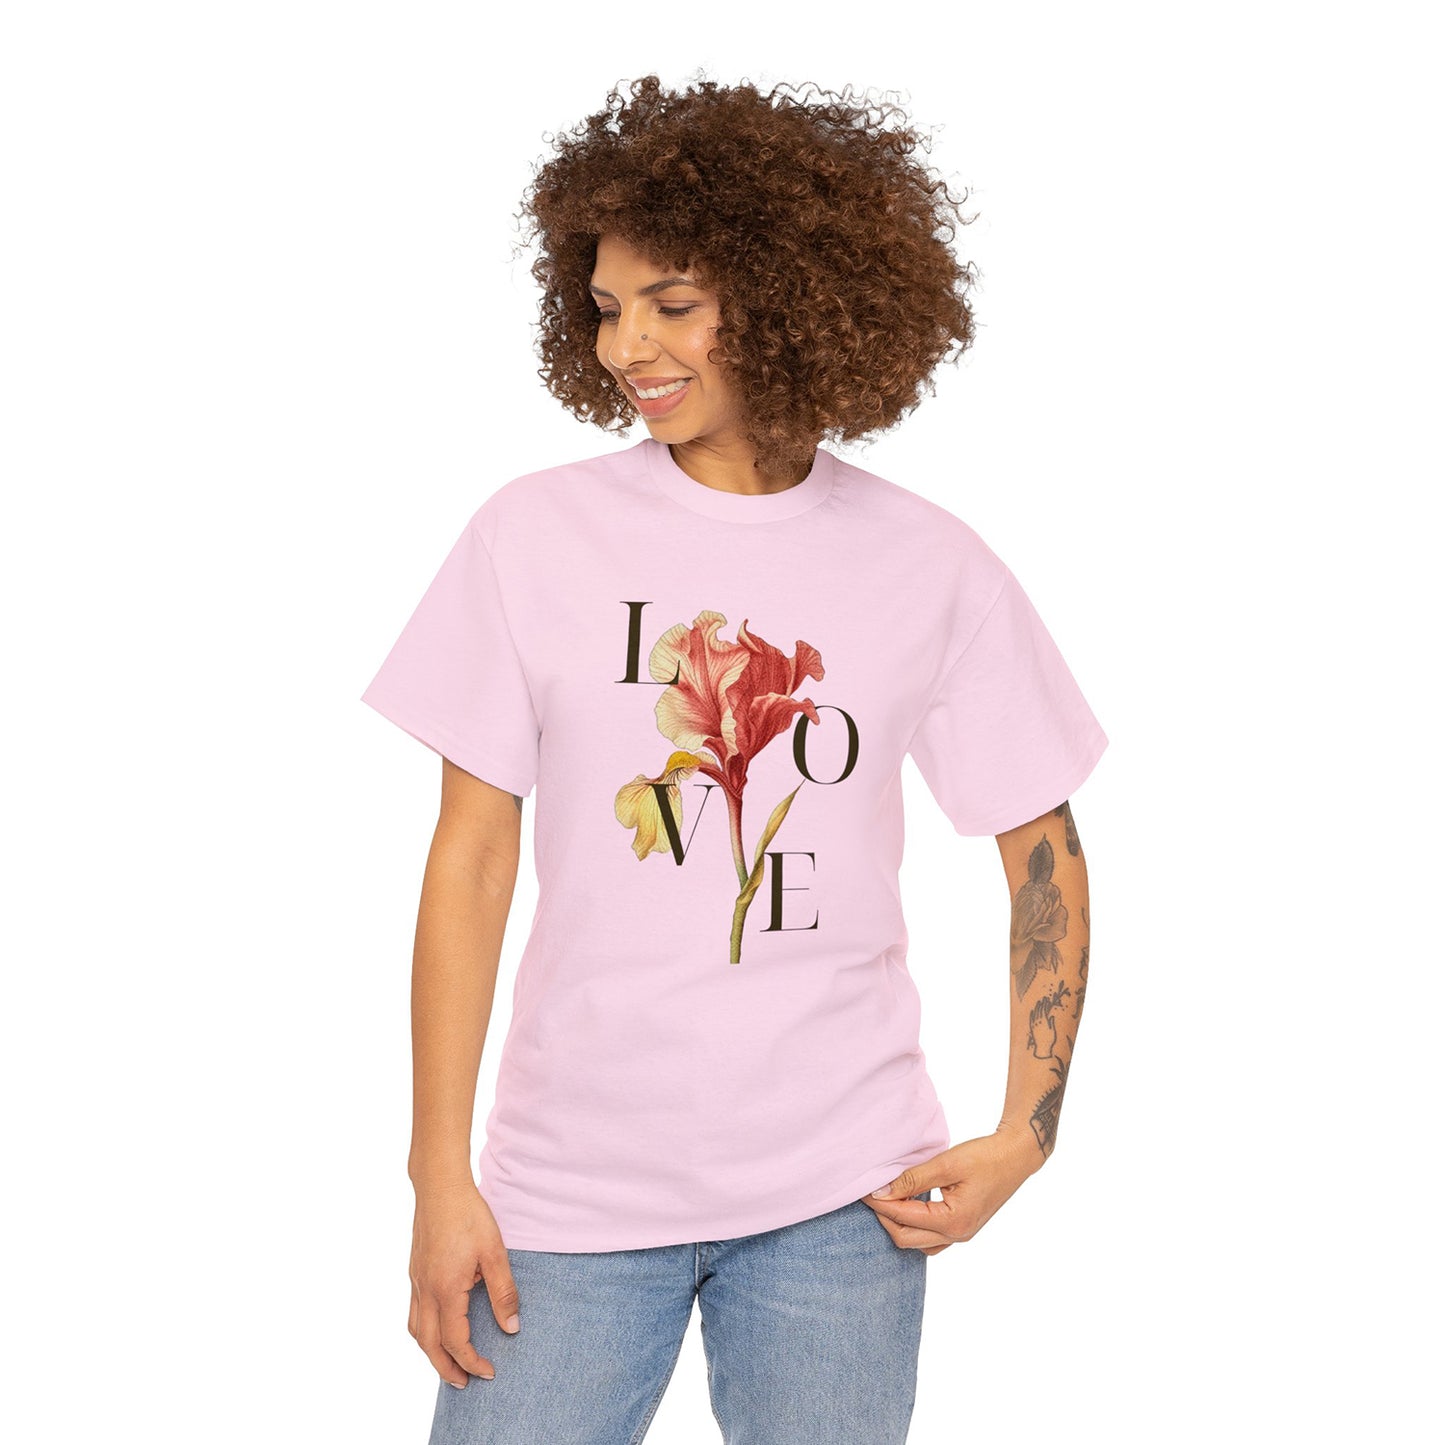 Women's Personalized Everyday Tee